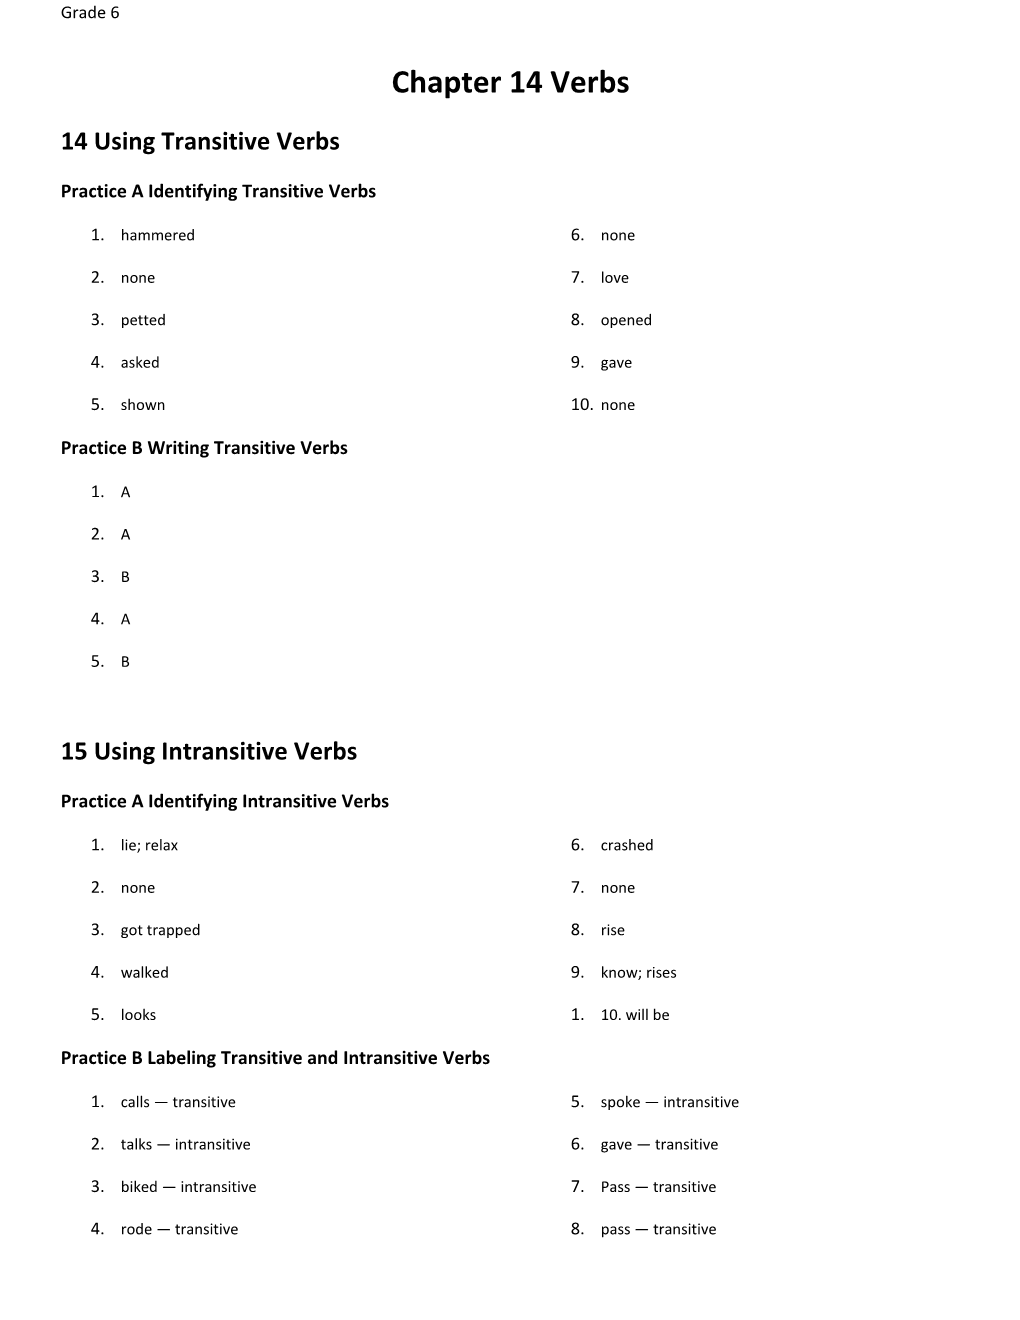 Practice a Identifying Transitive Verbs